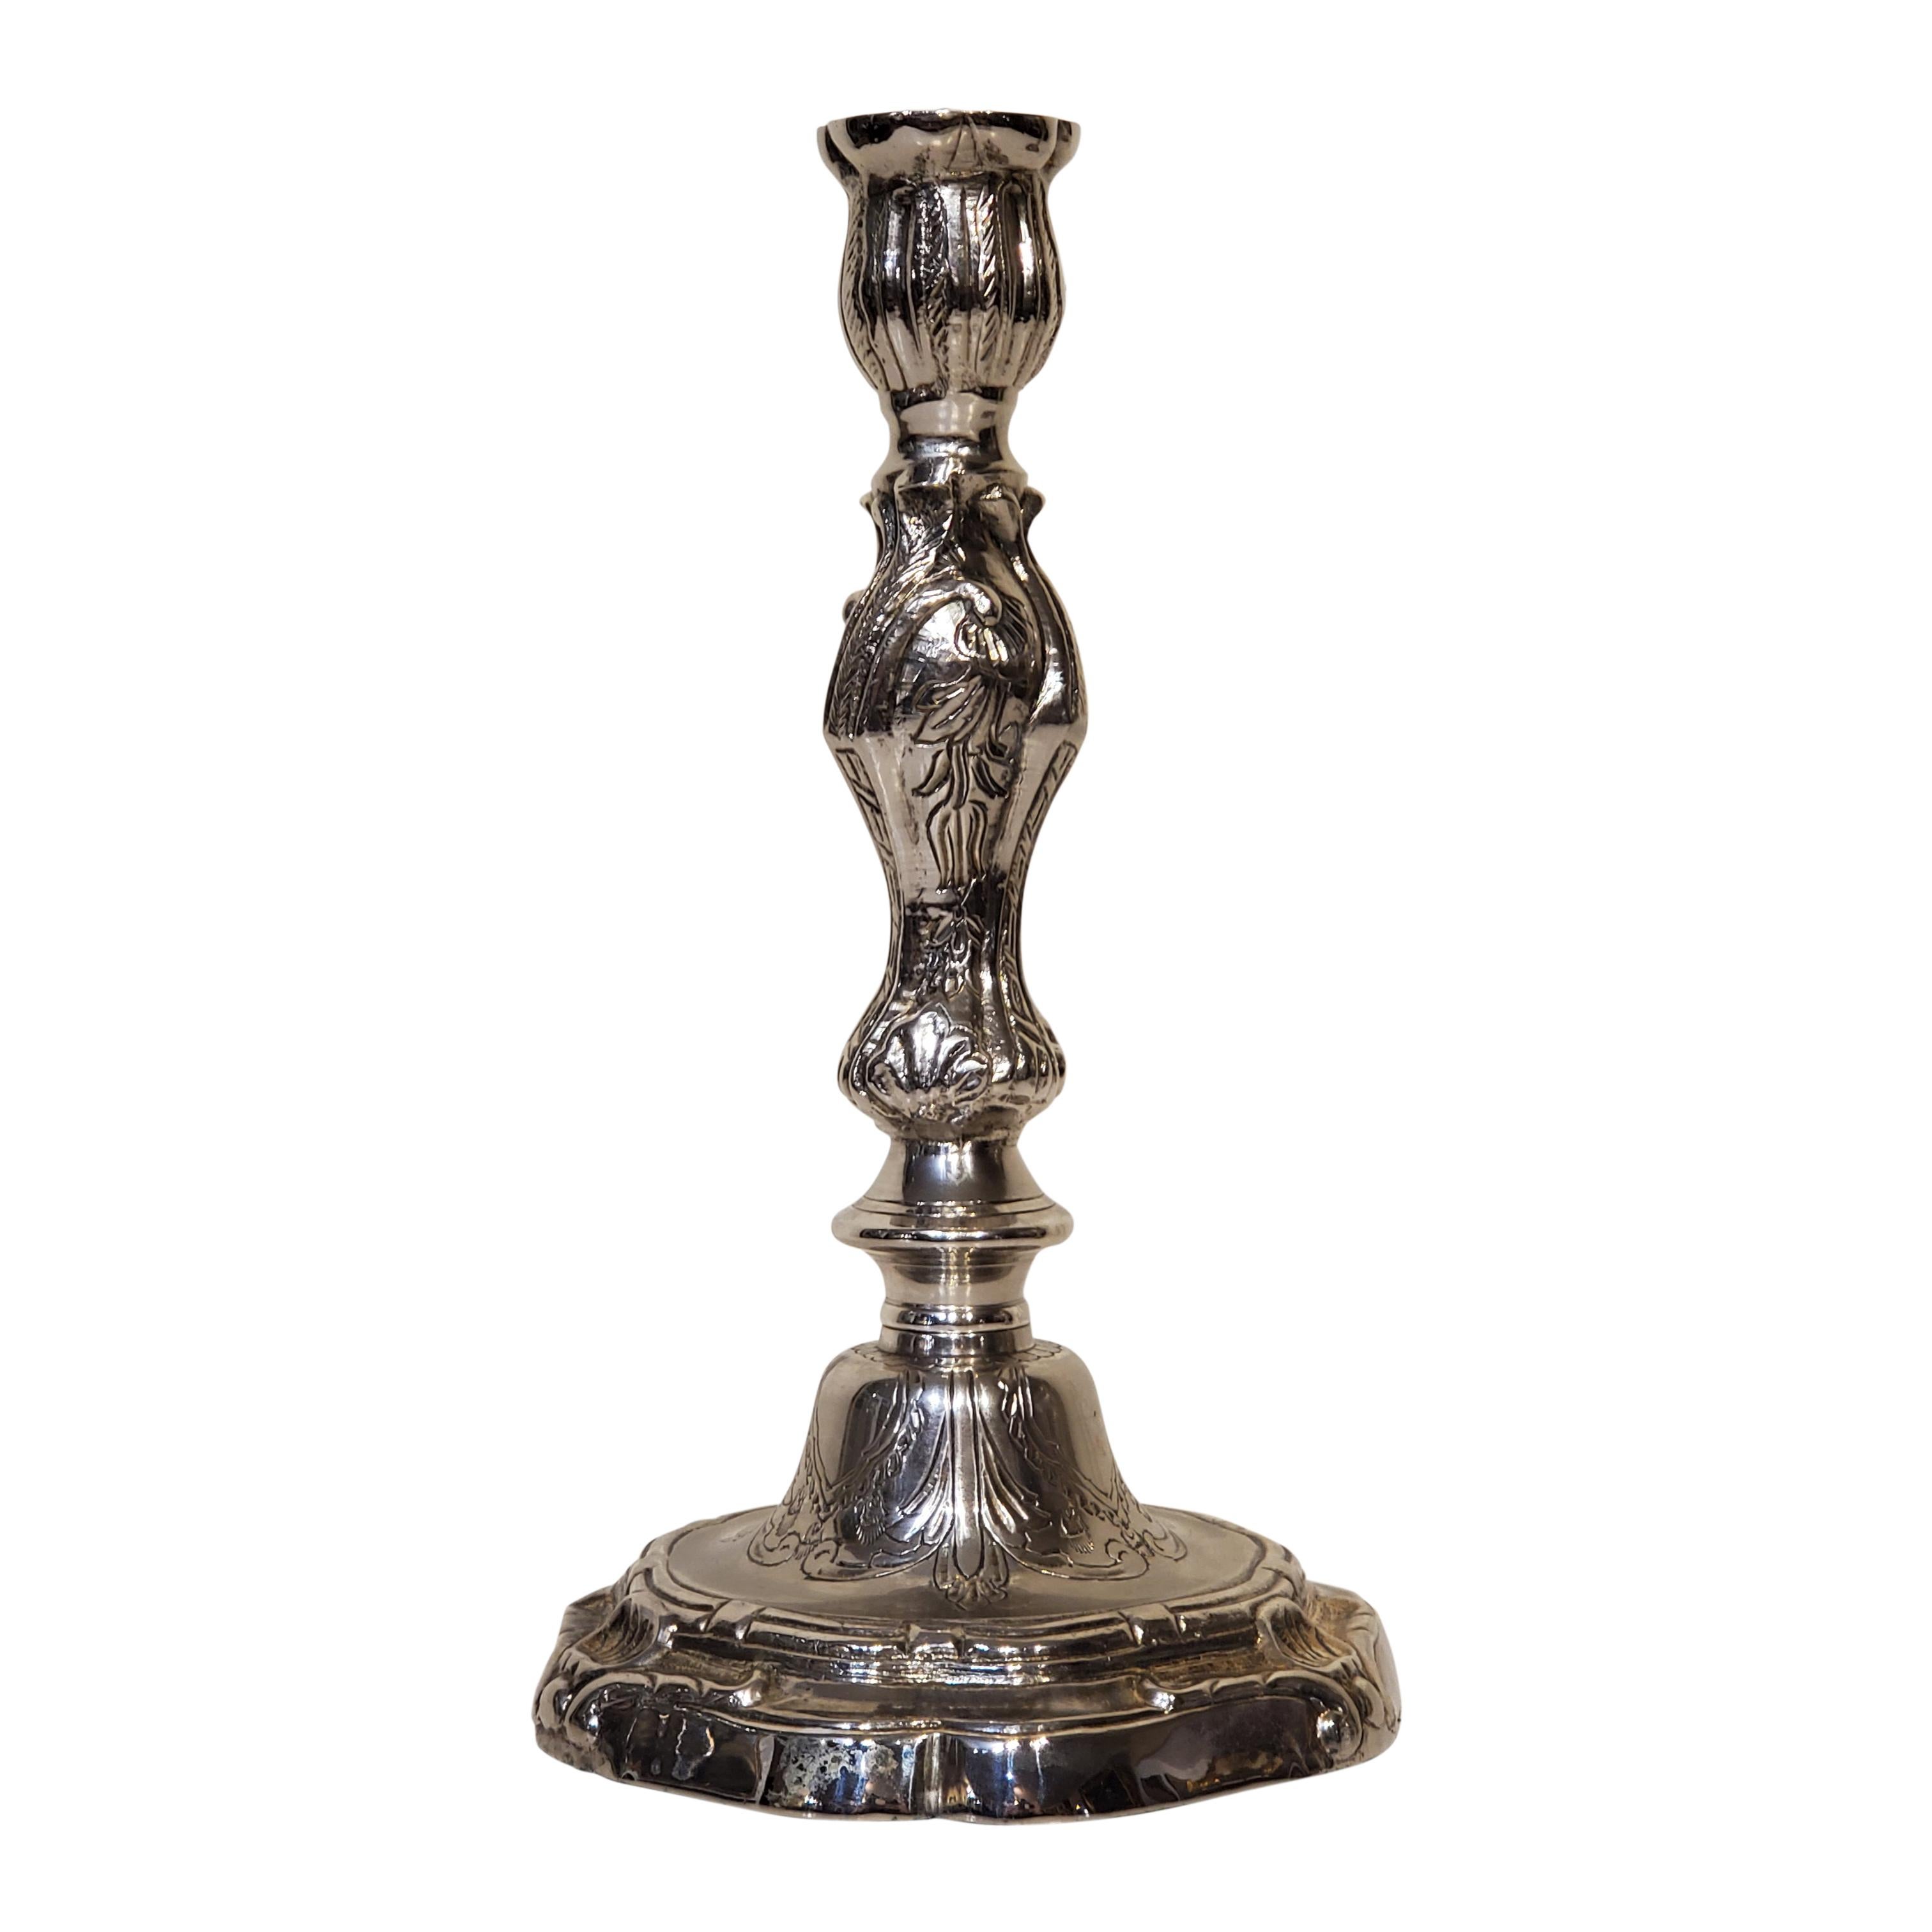 Pair of Louis XV style silver plated candlesticks. Also available as electrified candlestick lamps.

These were custom cast from 18th century bronze candlesticks and measure 9.5 inches tall by 5.5 inches wide by 5.5 inches deep.

Note the